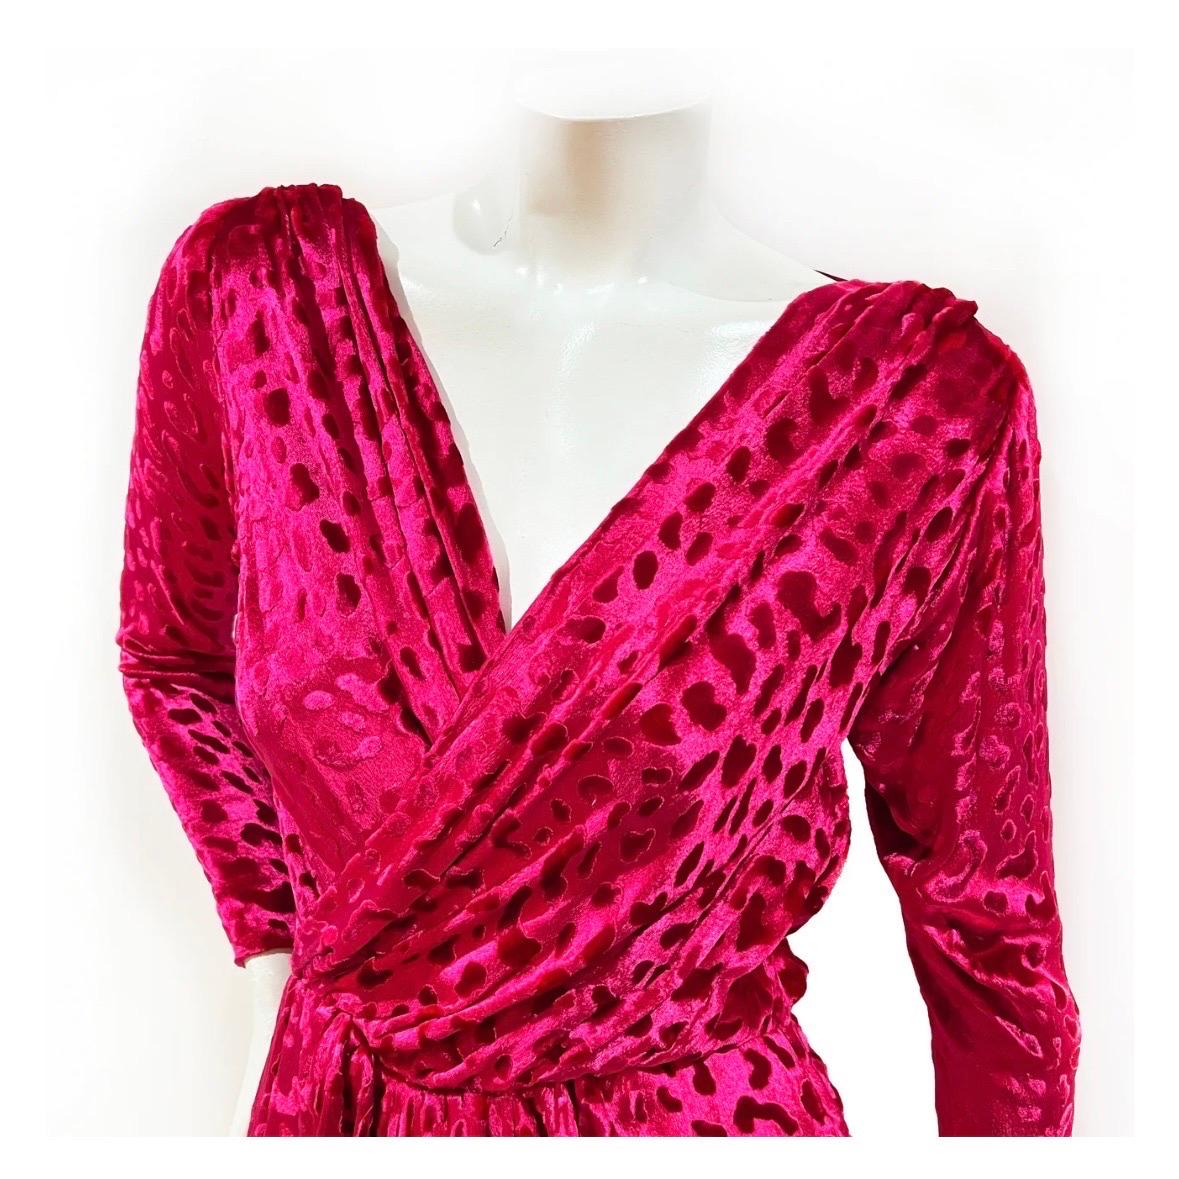 Velvet maxi dress by Saint Laurent Rive Gauche 
Circa 1980's
Made in France
Hot pink velvet 
Burnout leopard print throughout 
Long sleeved
Wrapped bodice 
Zipper slits on each cuff
Dual hip pockets
Side zip closure 
Velvet with silk blend